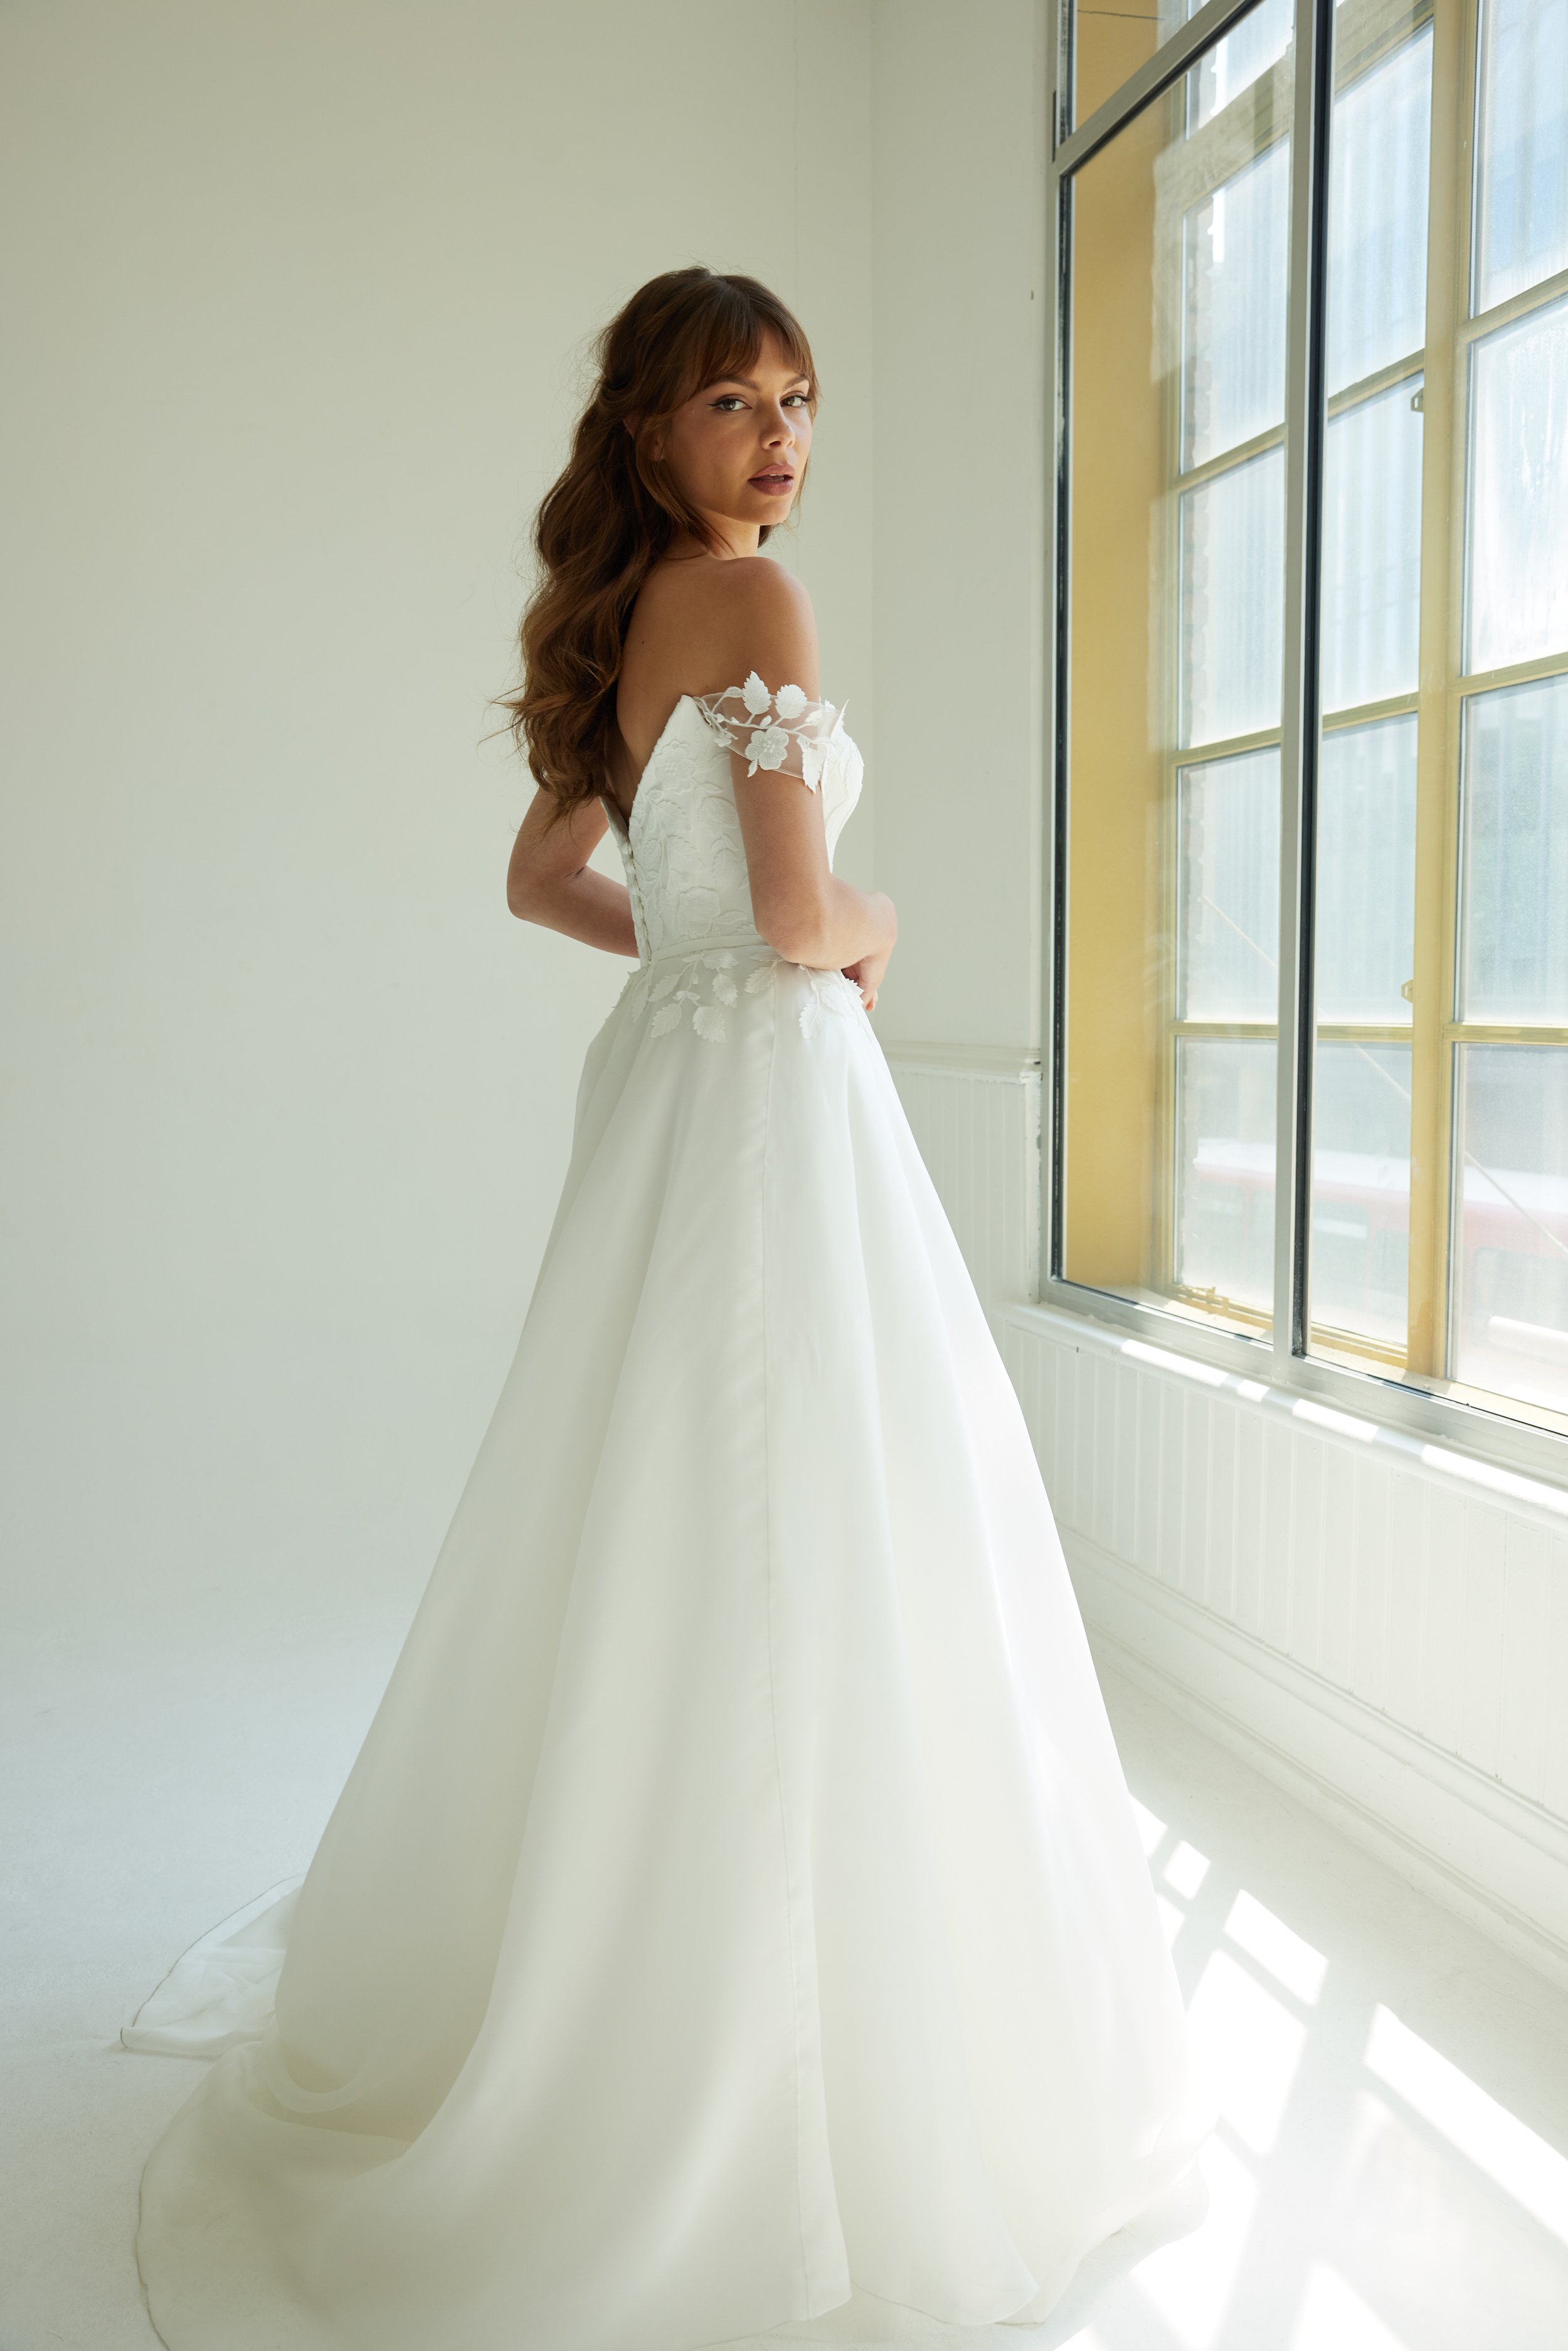 Thalasso Suzanne Neville at Frances Day Bridal  Back